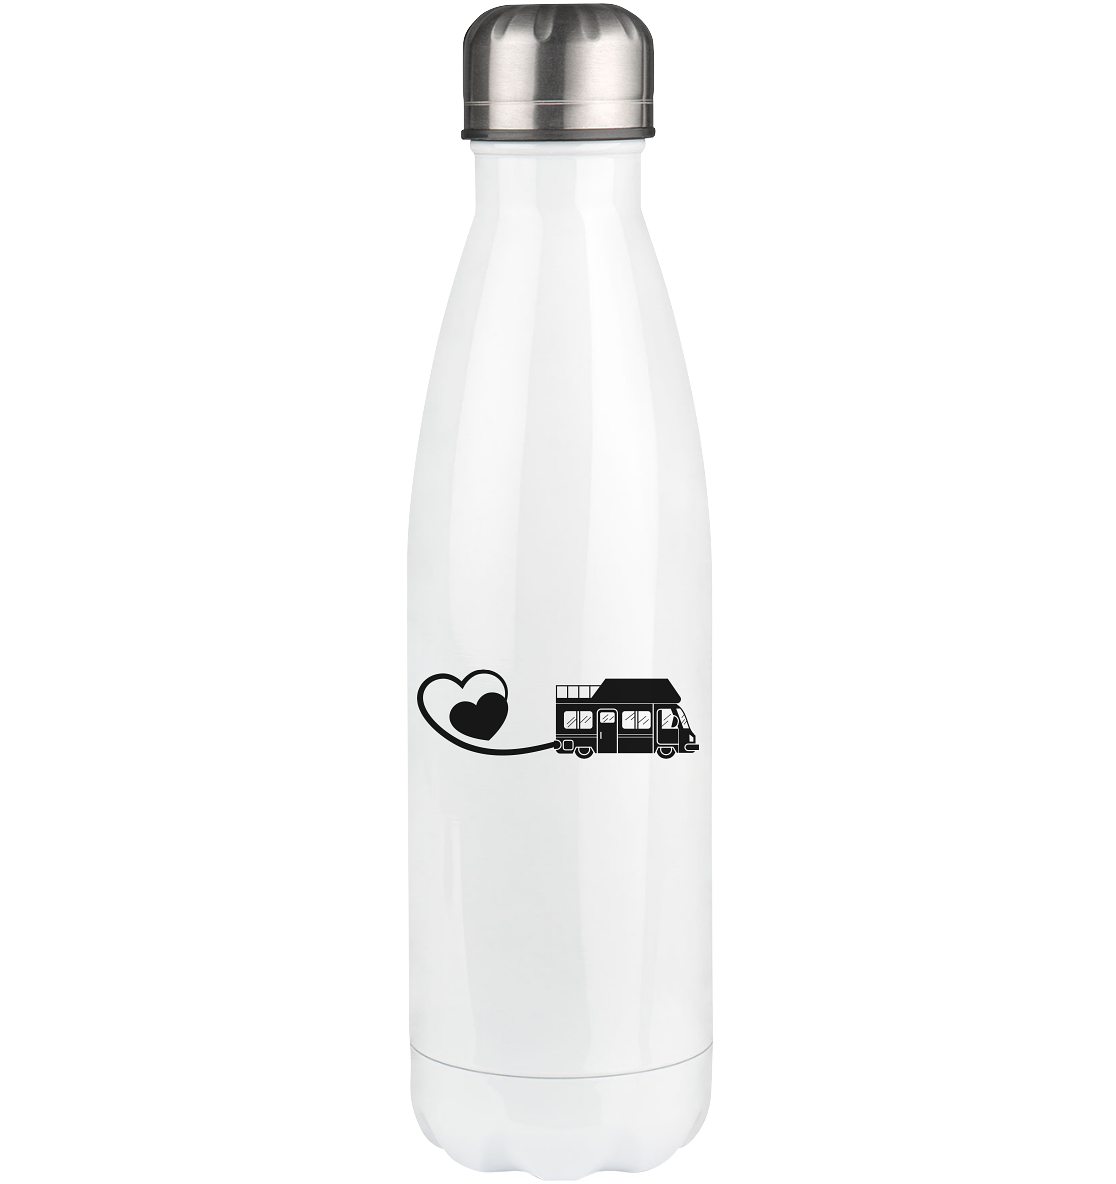 Heart 2 and Camping - Edelstahl Thermosflasche camping UONP 500ml